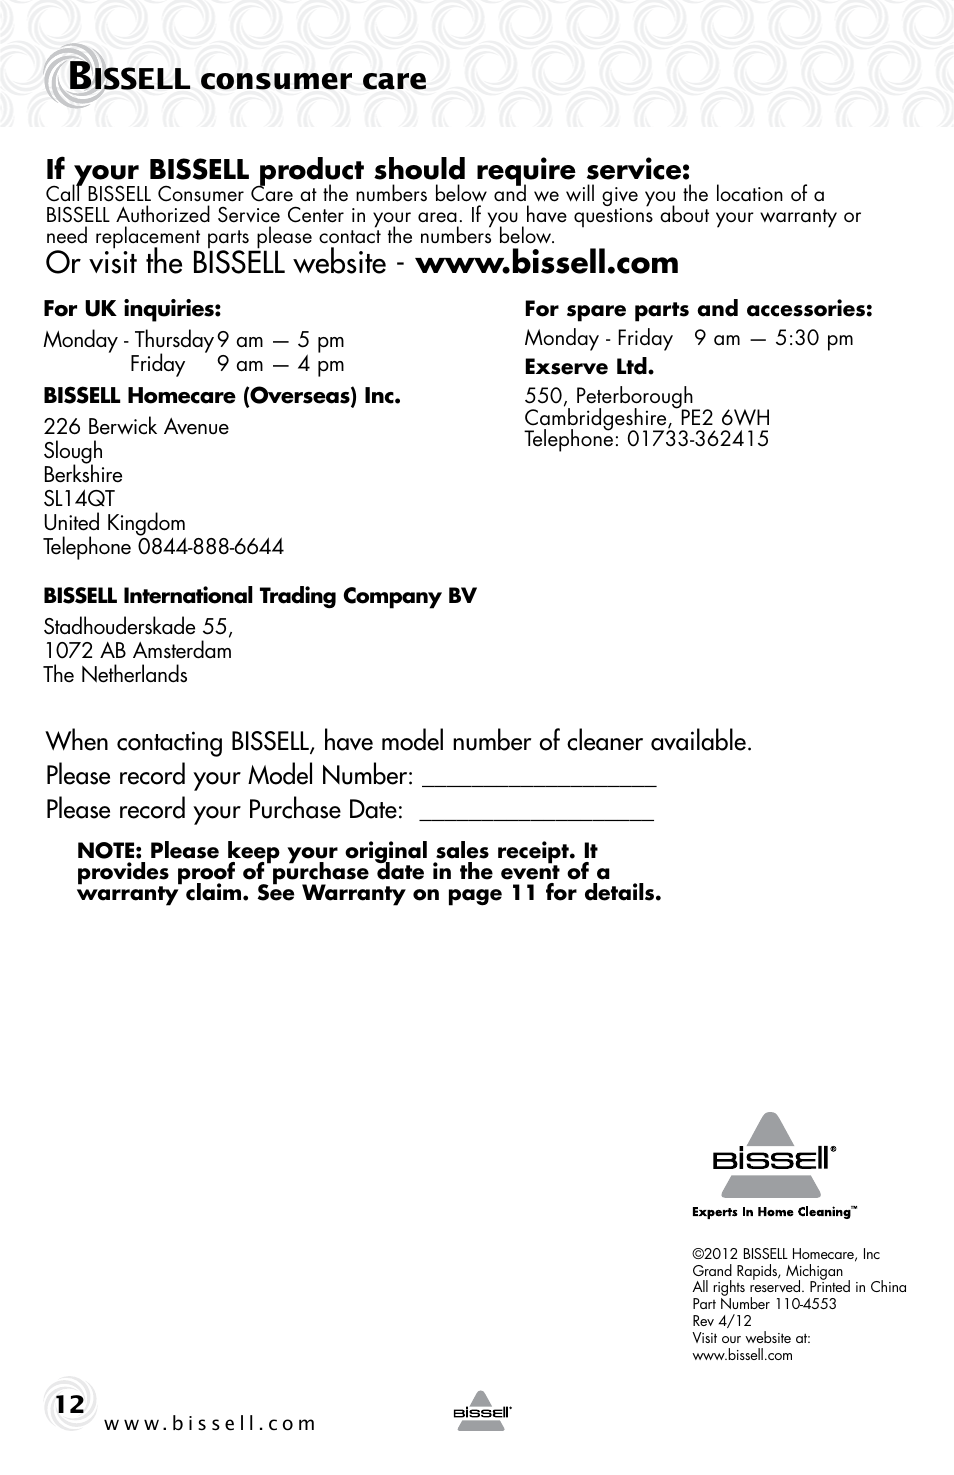 Issell consumer care, If your bissell product should require service | Bissell 4757e User Manual | Page 12 / 12